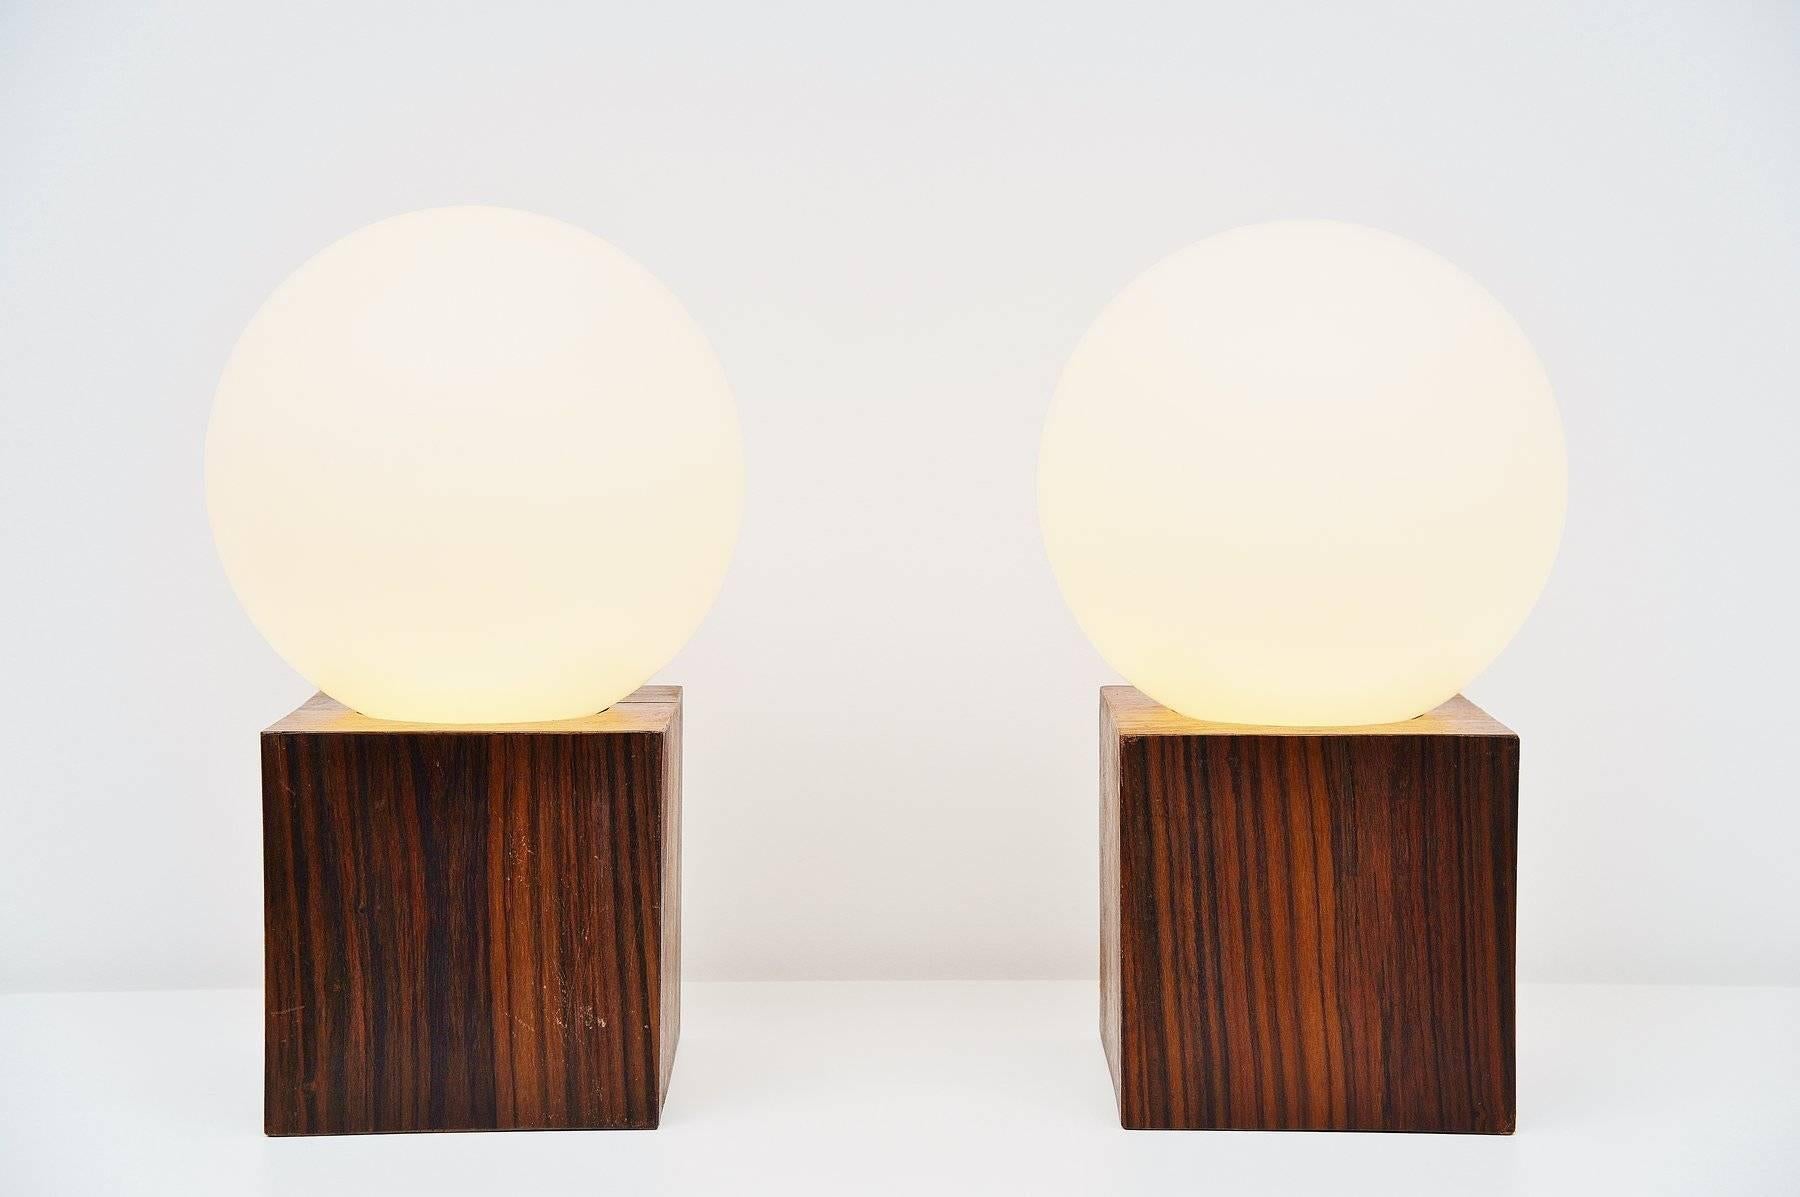 Fantastic oversized table lamps designed and made by Studio Reggiani, Italy, 1970. These table lamps have very heavy solid rosewood bases and frosted white glass shades. They give very nice warm light when lit and would look highly decorative in any